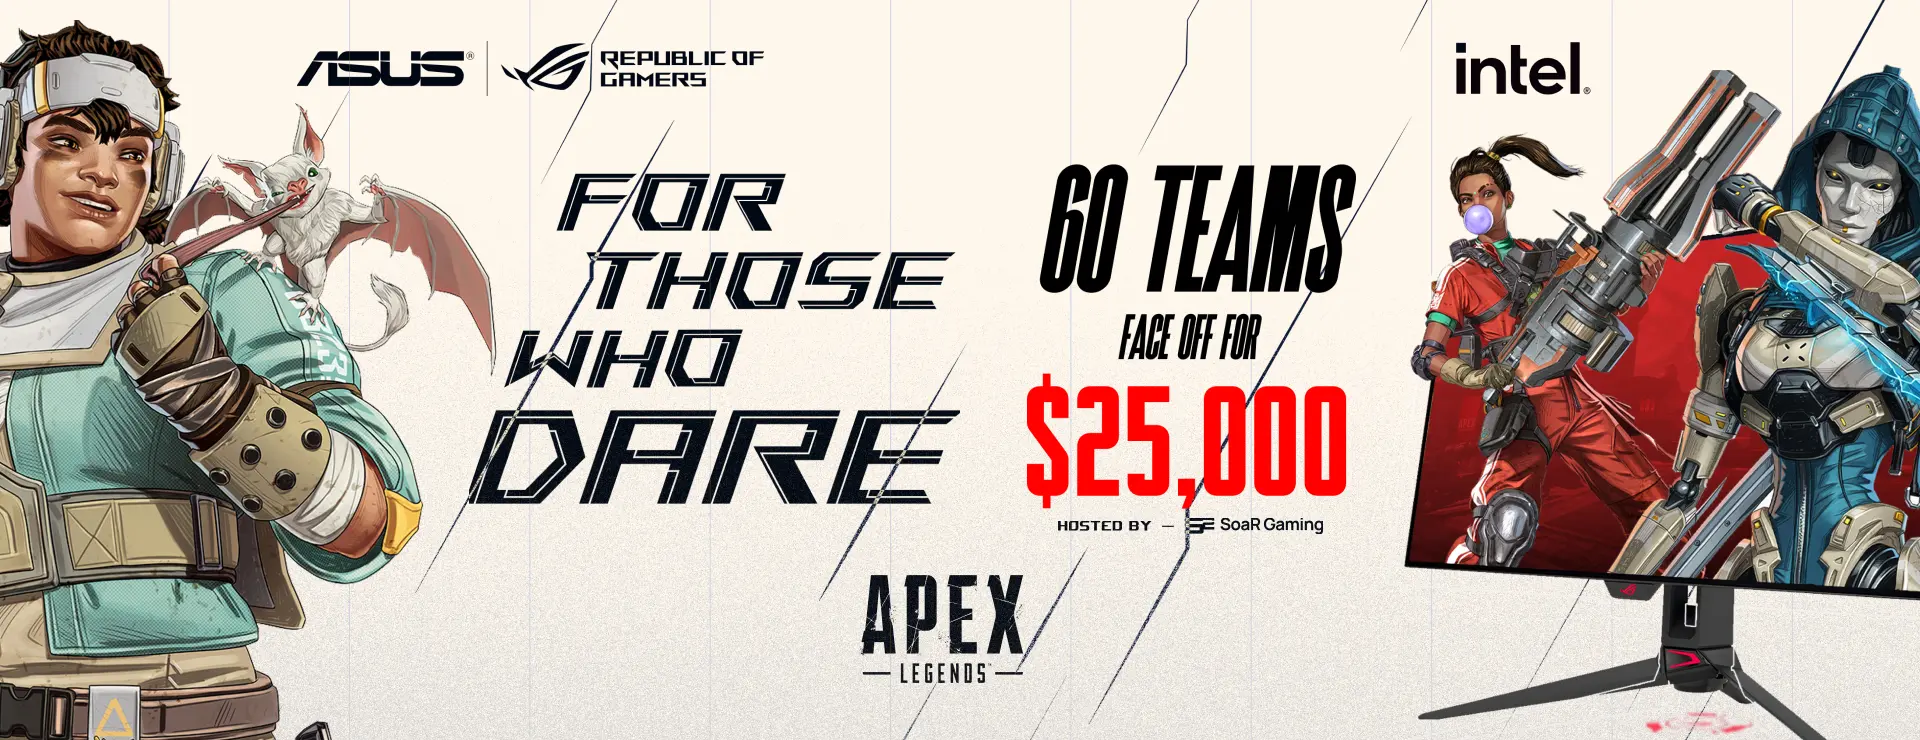 ASUS ROG APEXLEGENDs Tournament 2024 For Those Who Dare, 60 teams face off for $25,000 hosted by SoaR Gaming.